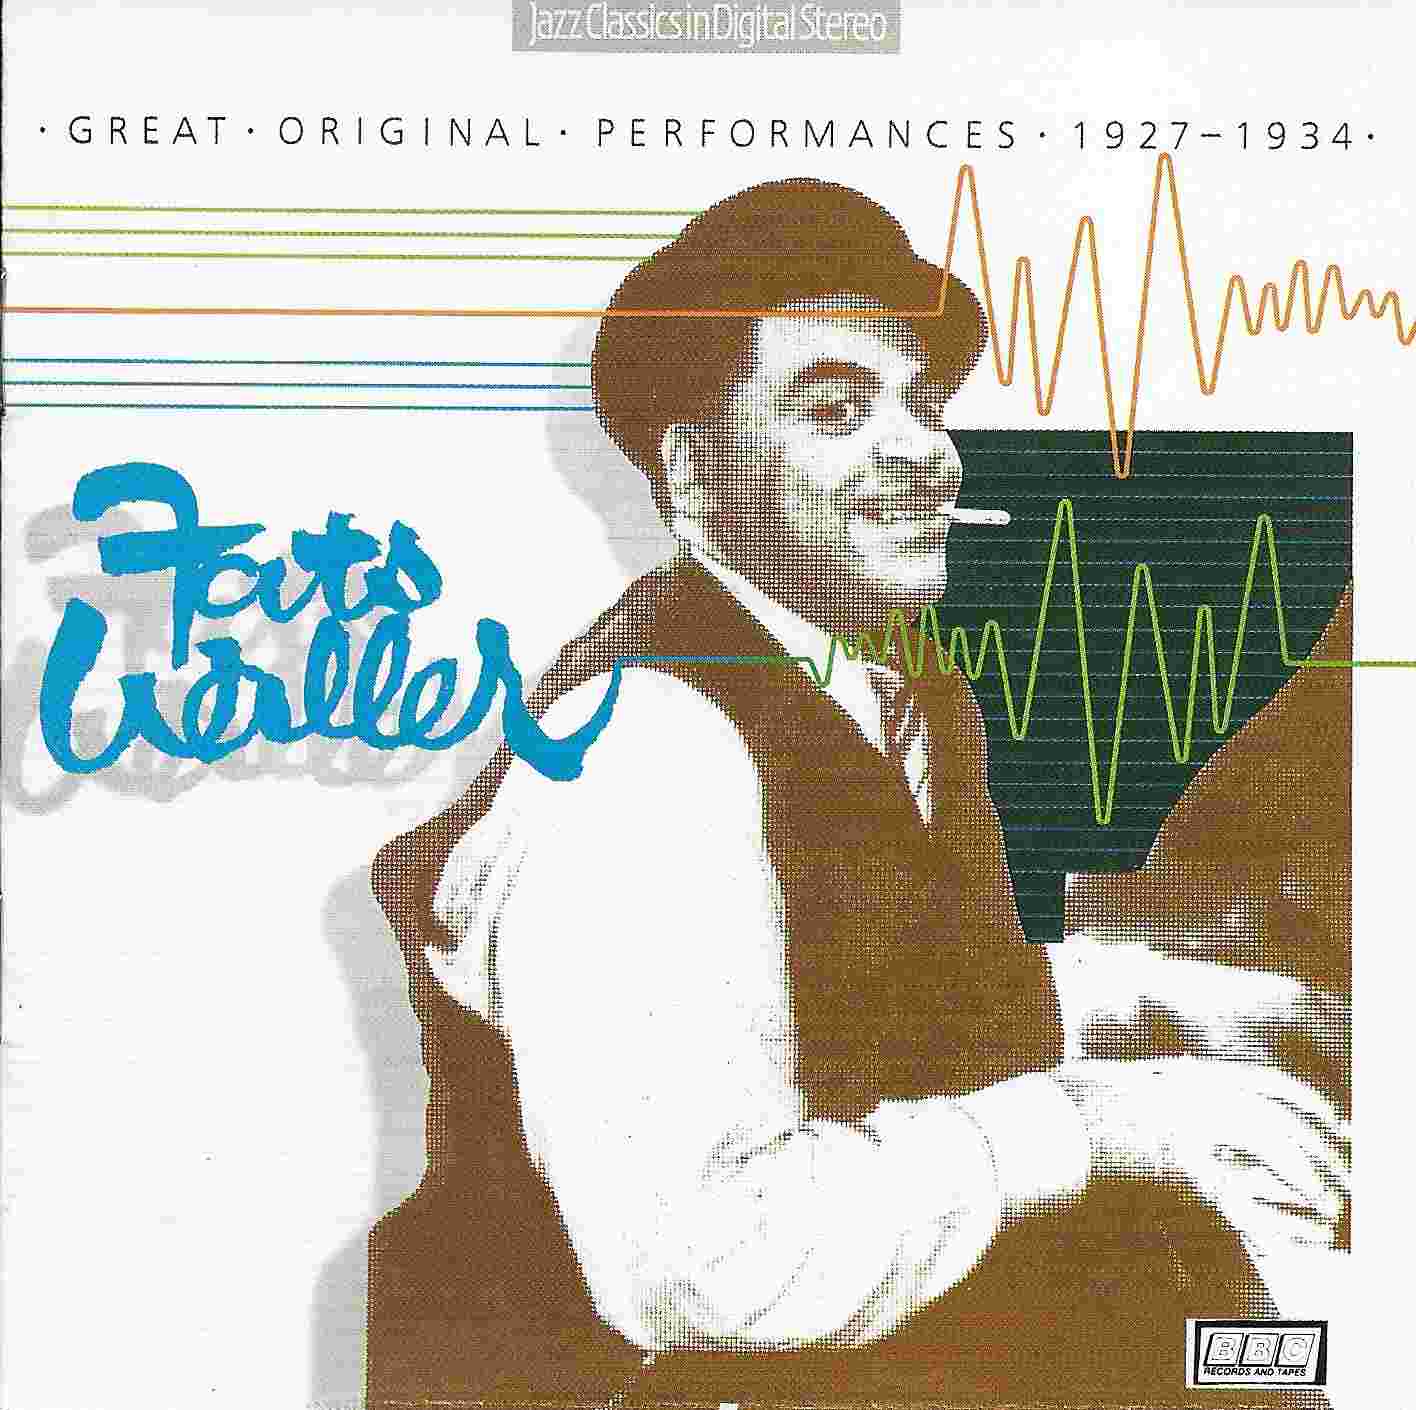 Picture of BBCCD598 Jazz Classics - Fats Waller by artist Fats Waller from the BBC cds - Records and Tapes library